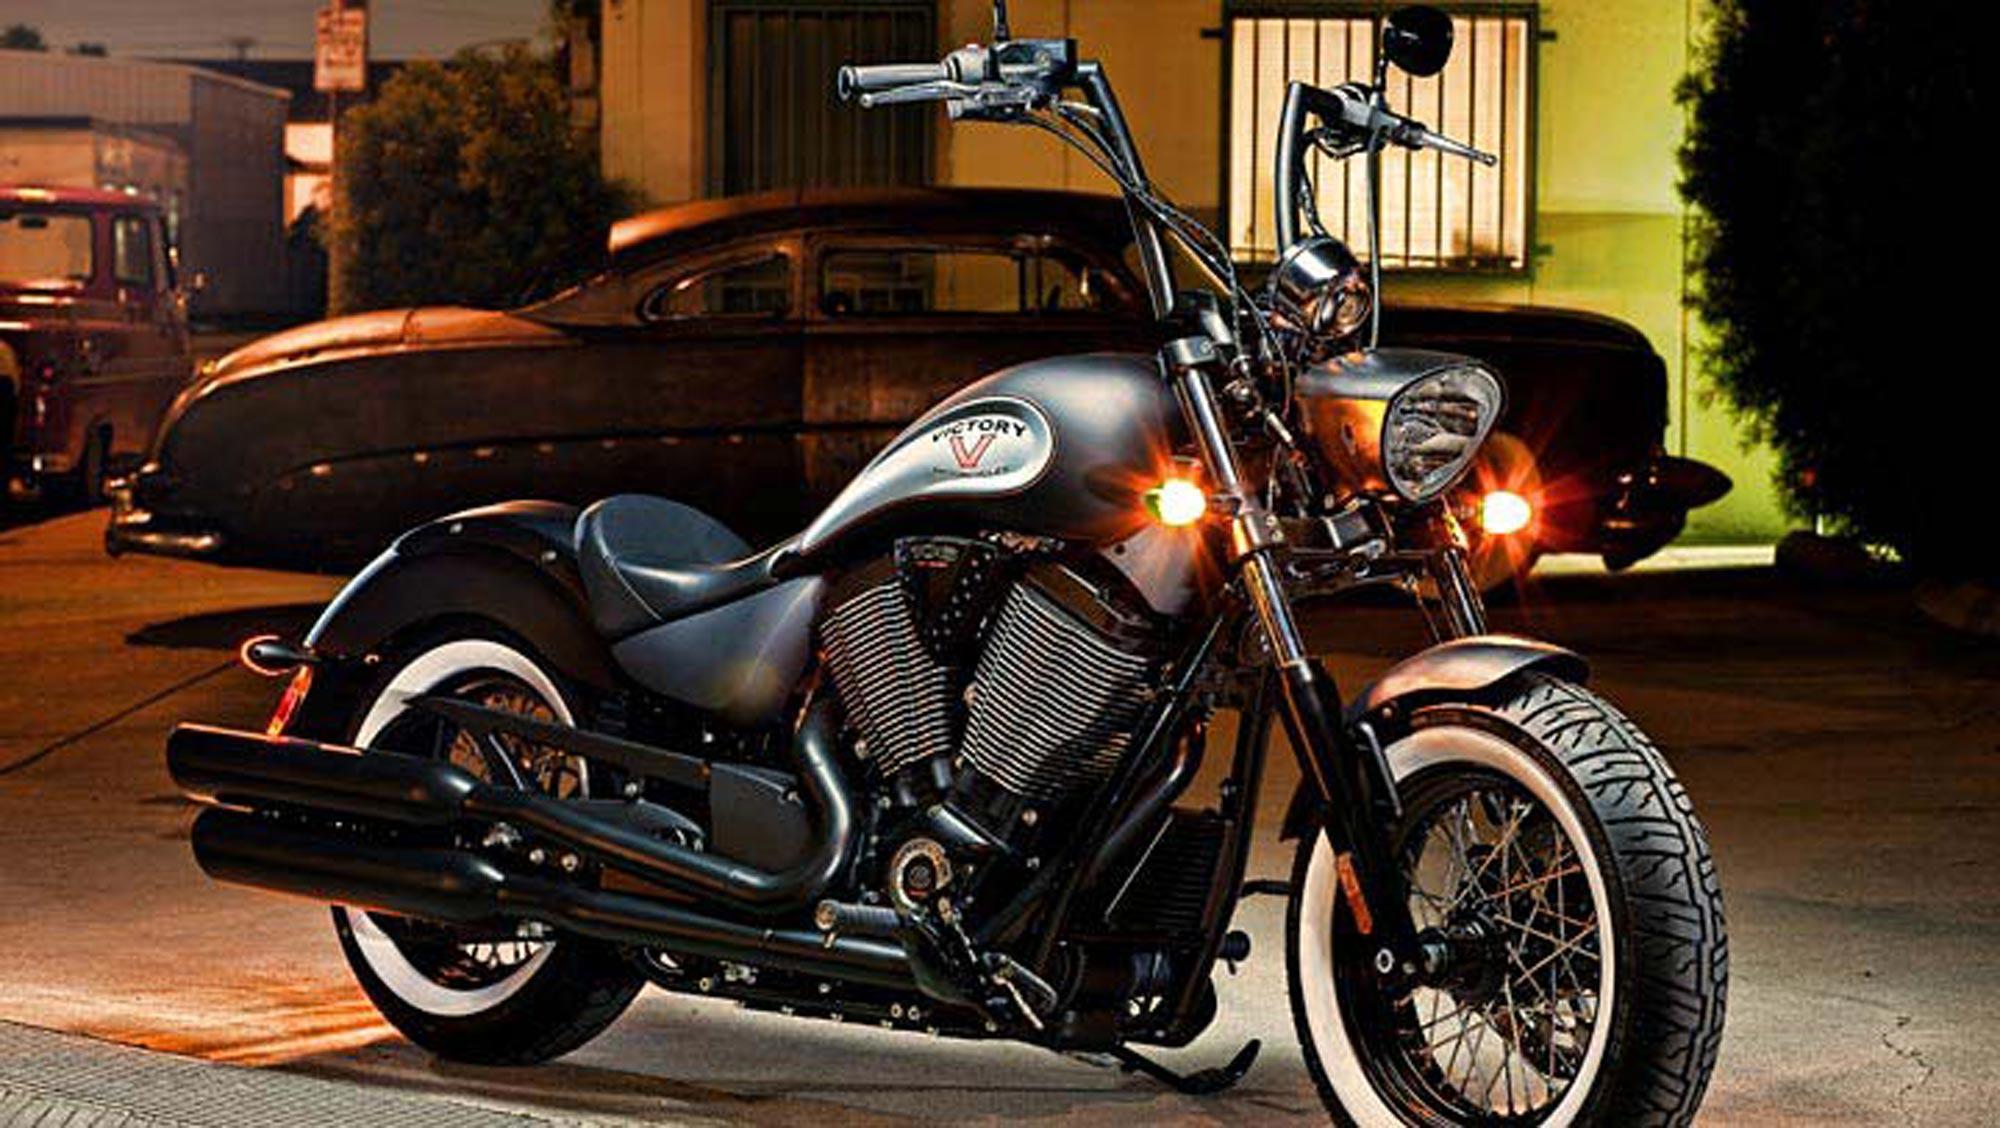 image For > 2013 Victory Motorcycles Wallpaper